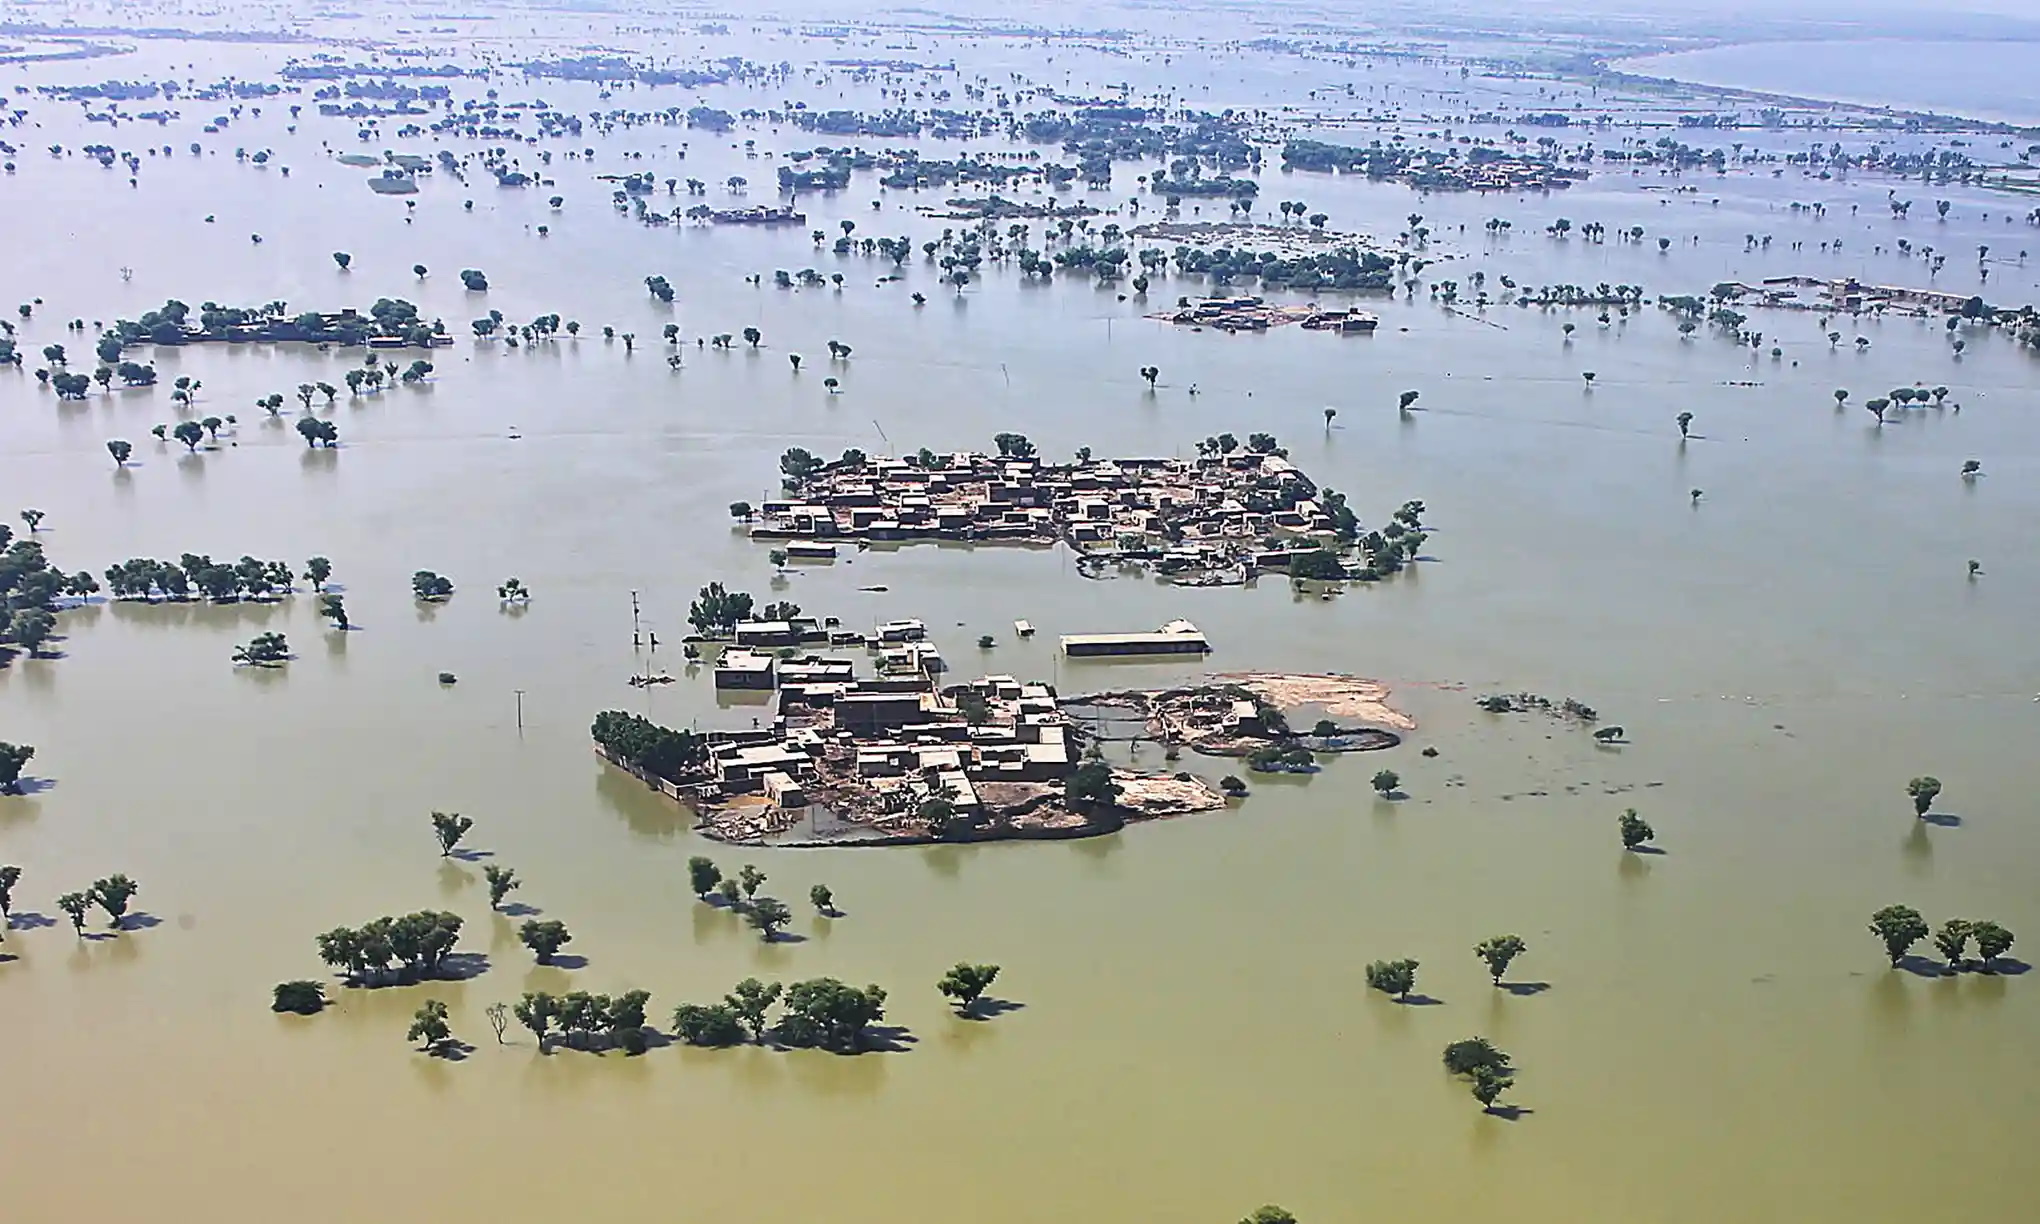 Aerial view of a flooded residential area after heavy monsoon rains in Sindh province, Pakistan, where aid workers are facing huge challenges to reach those in need. Photo: Husnain Ali / AFP / Getty Images